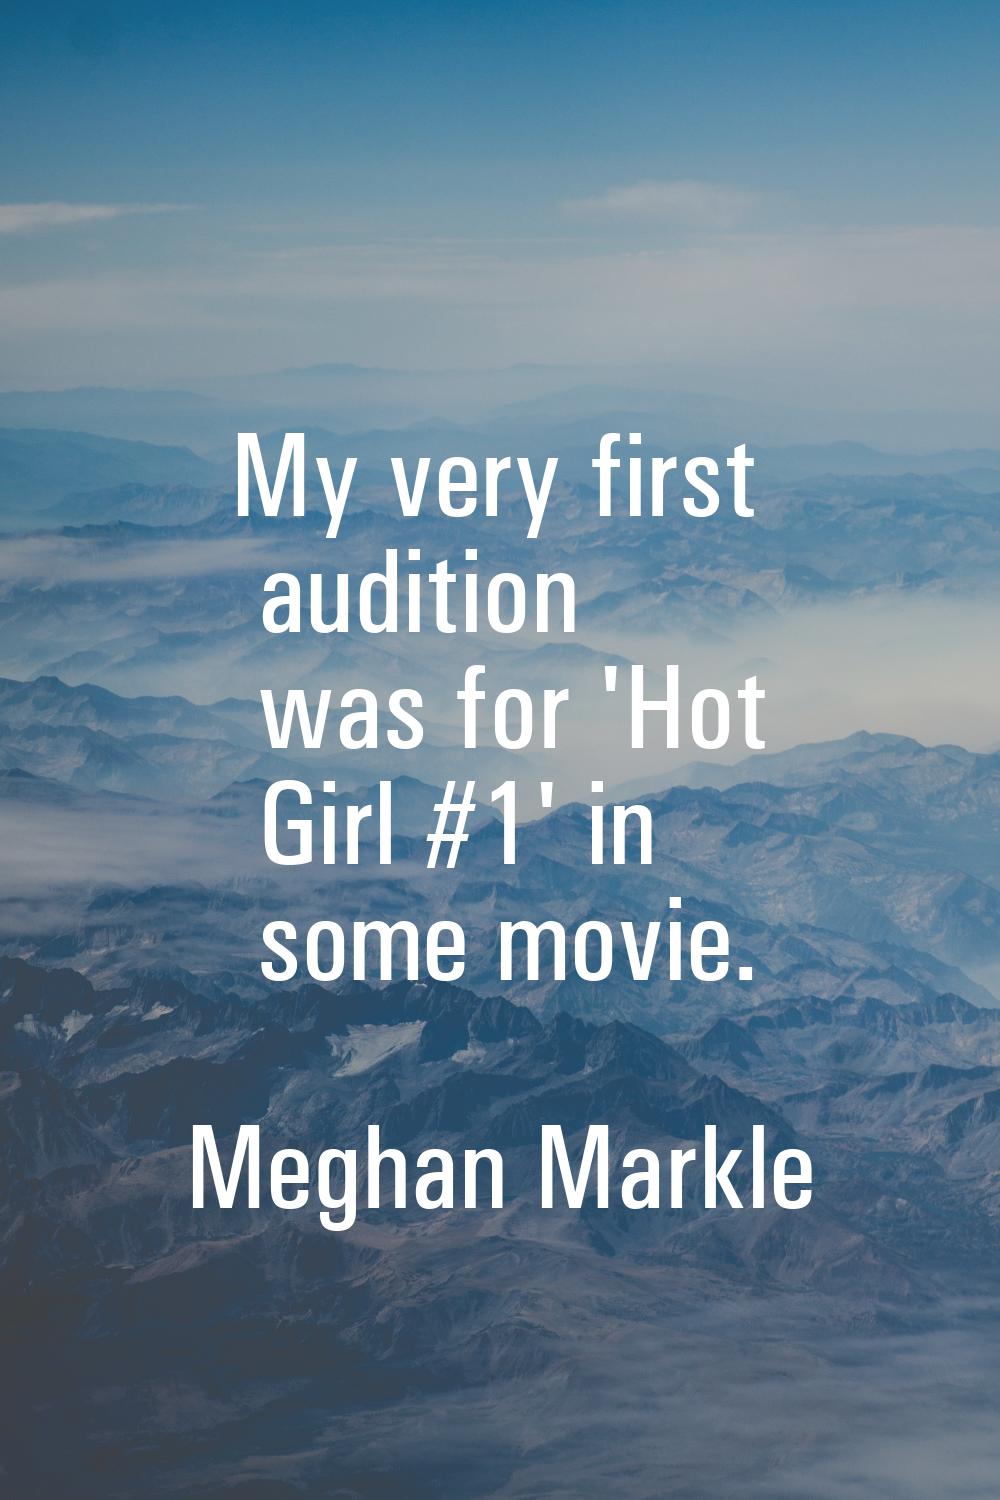 My very first audition was for 'Hot Girl #1' in some movie.